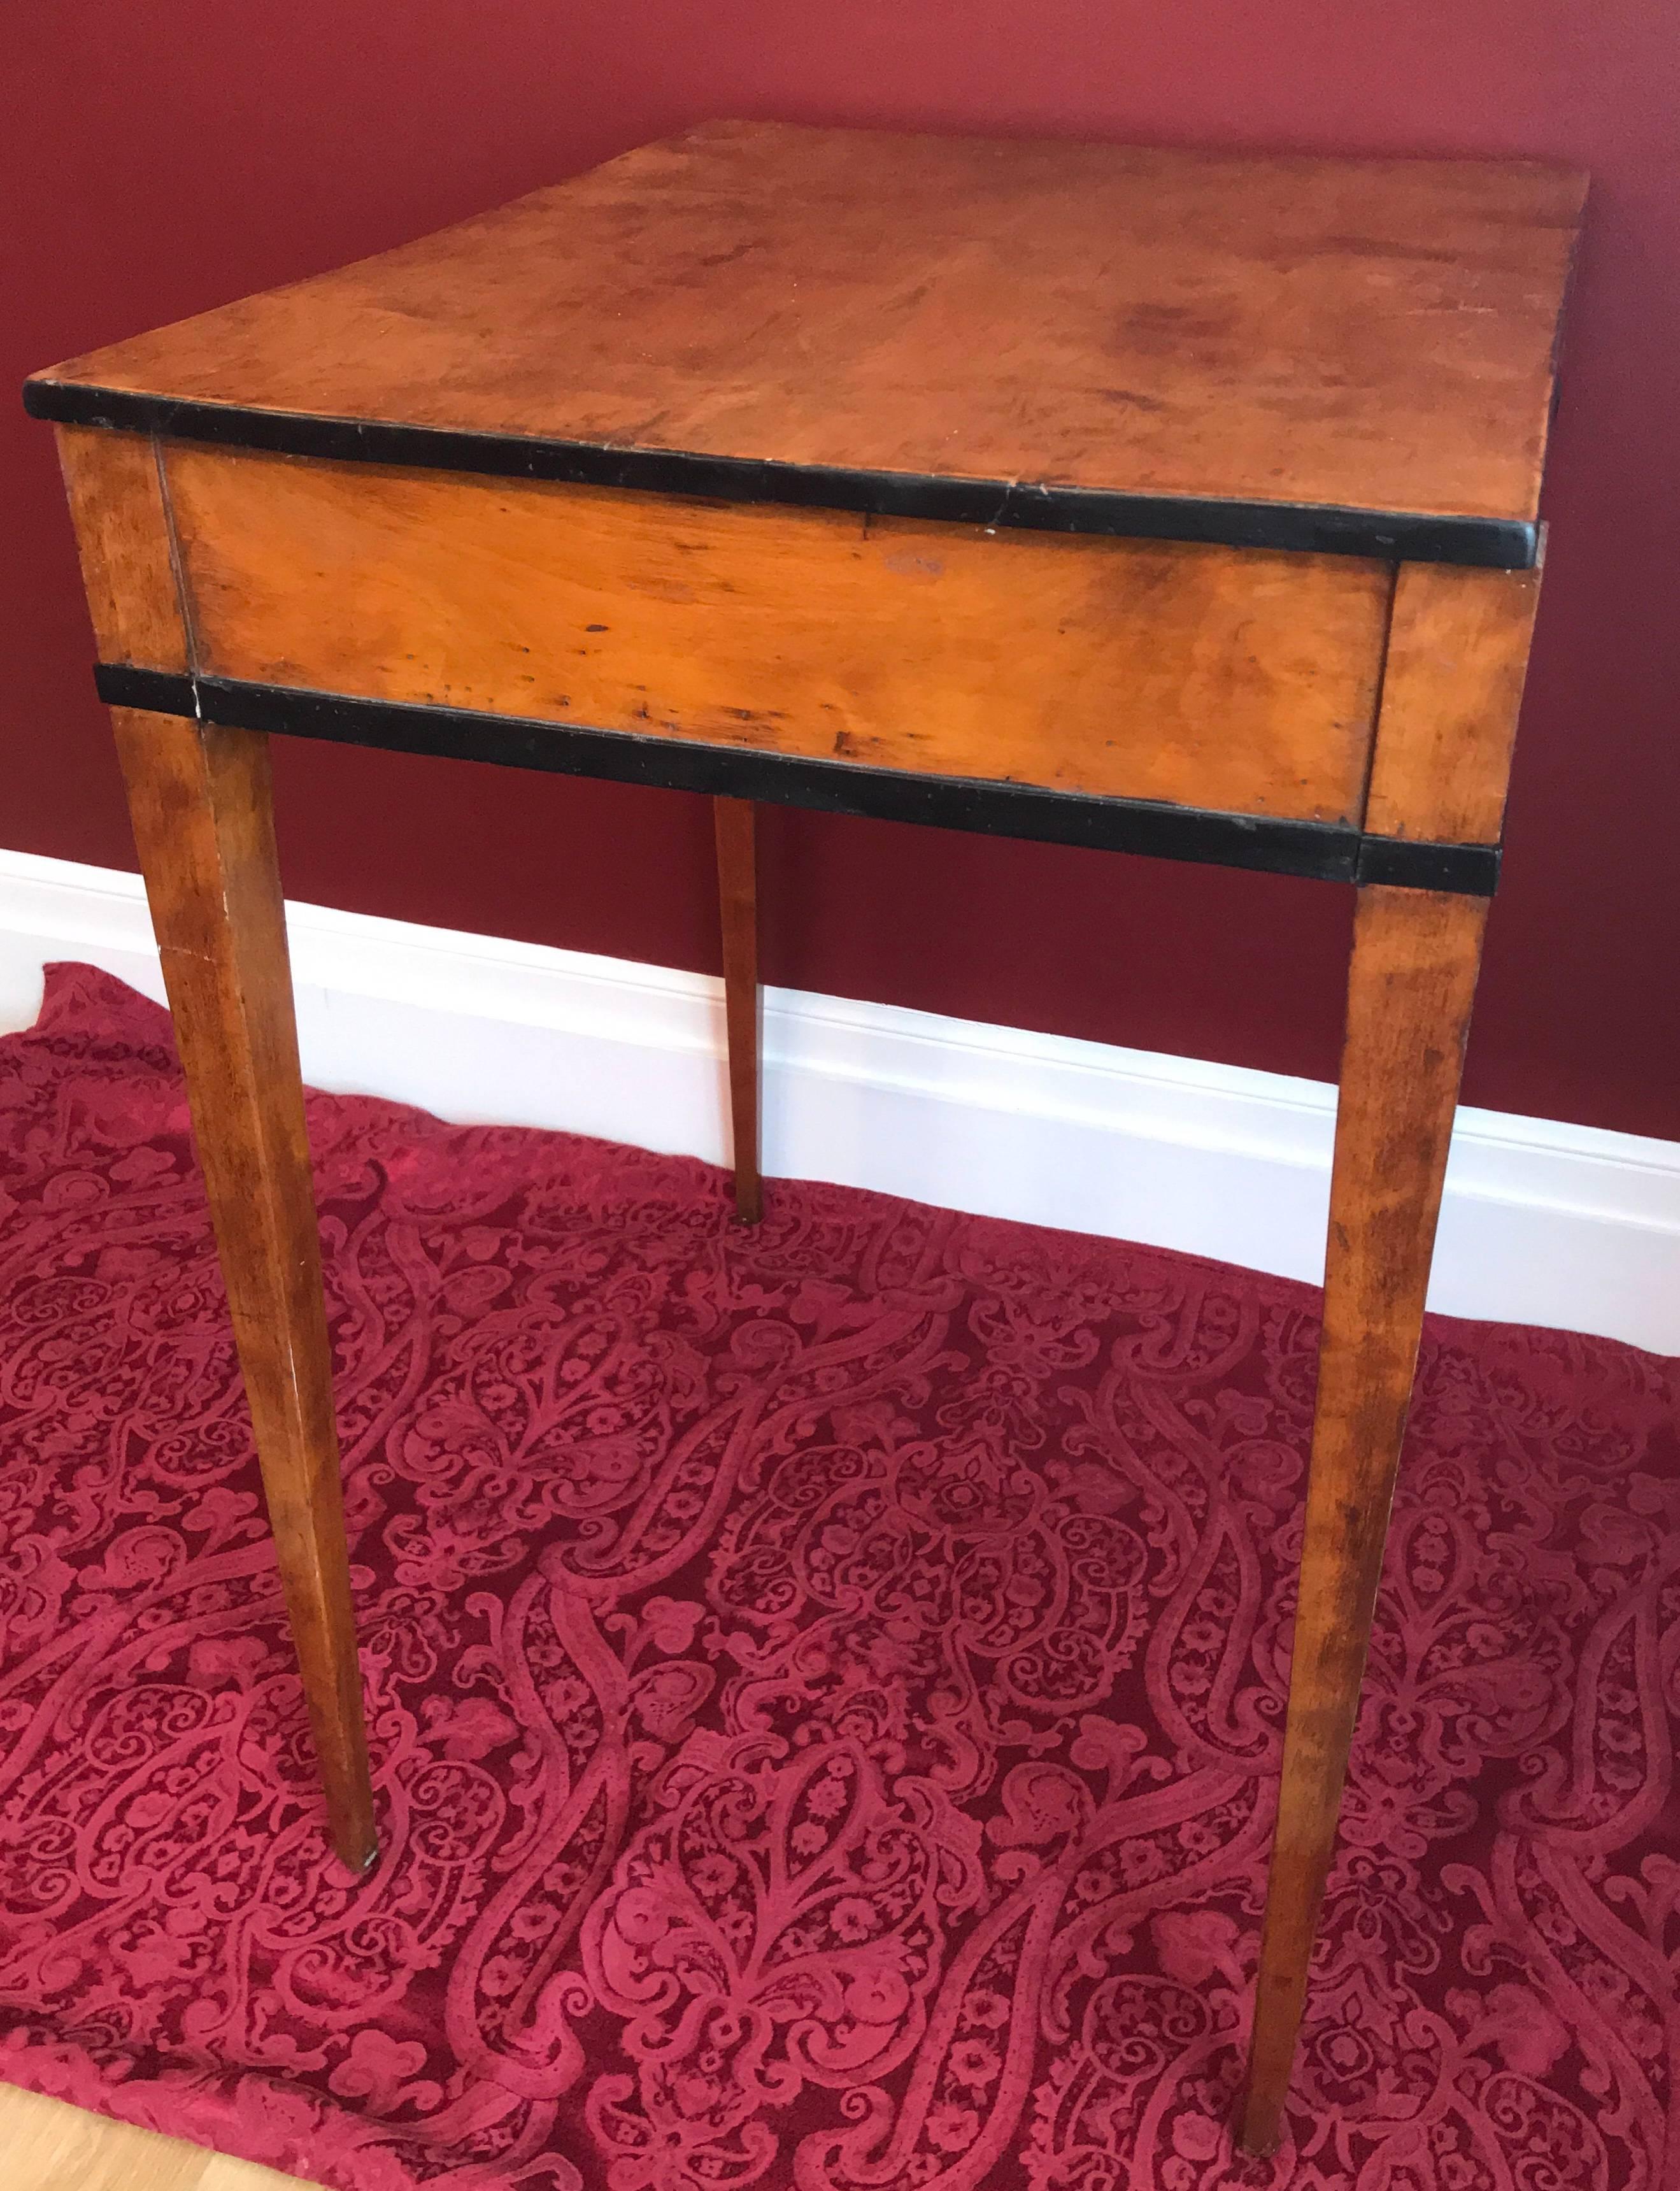 Biedermeier Sewing table, Germany, 1830, birchwood veneer with ebonized details. One drawer with different compartments and pin cushion. In restored condition without loosing its vintage charm. The key is missing.